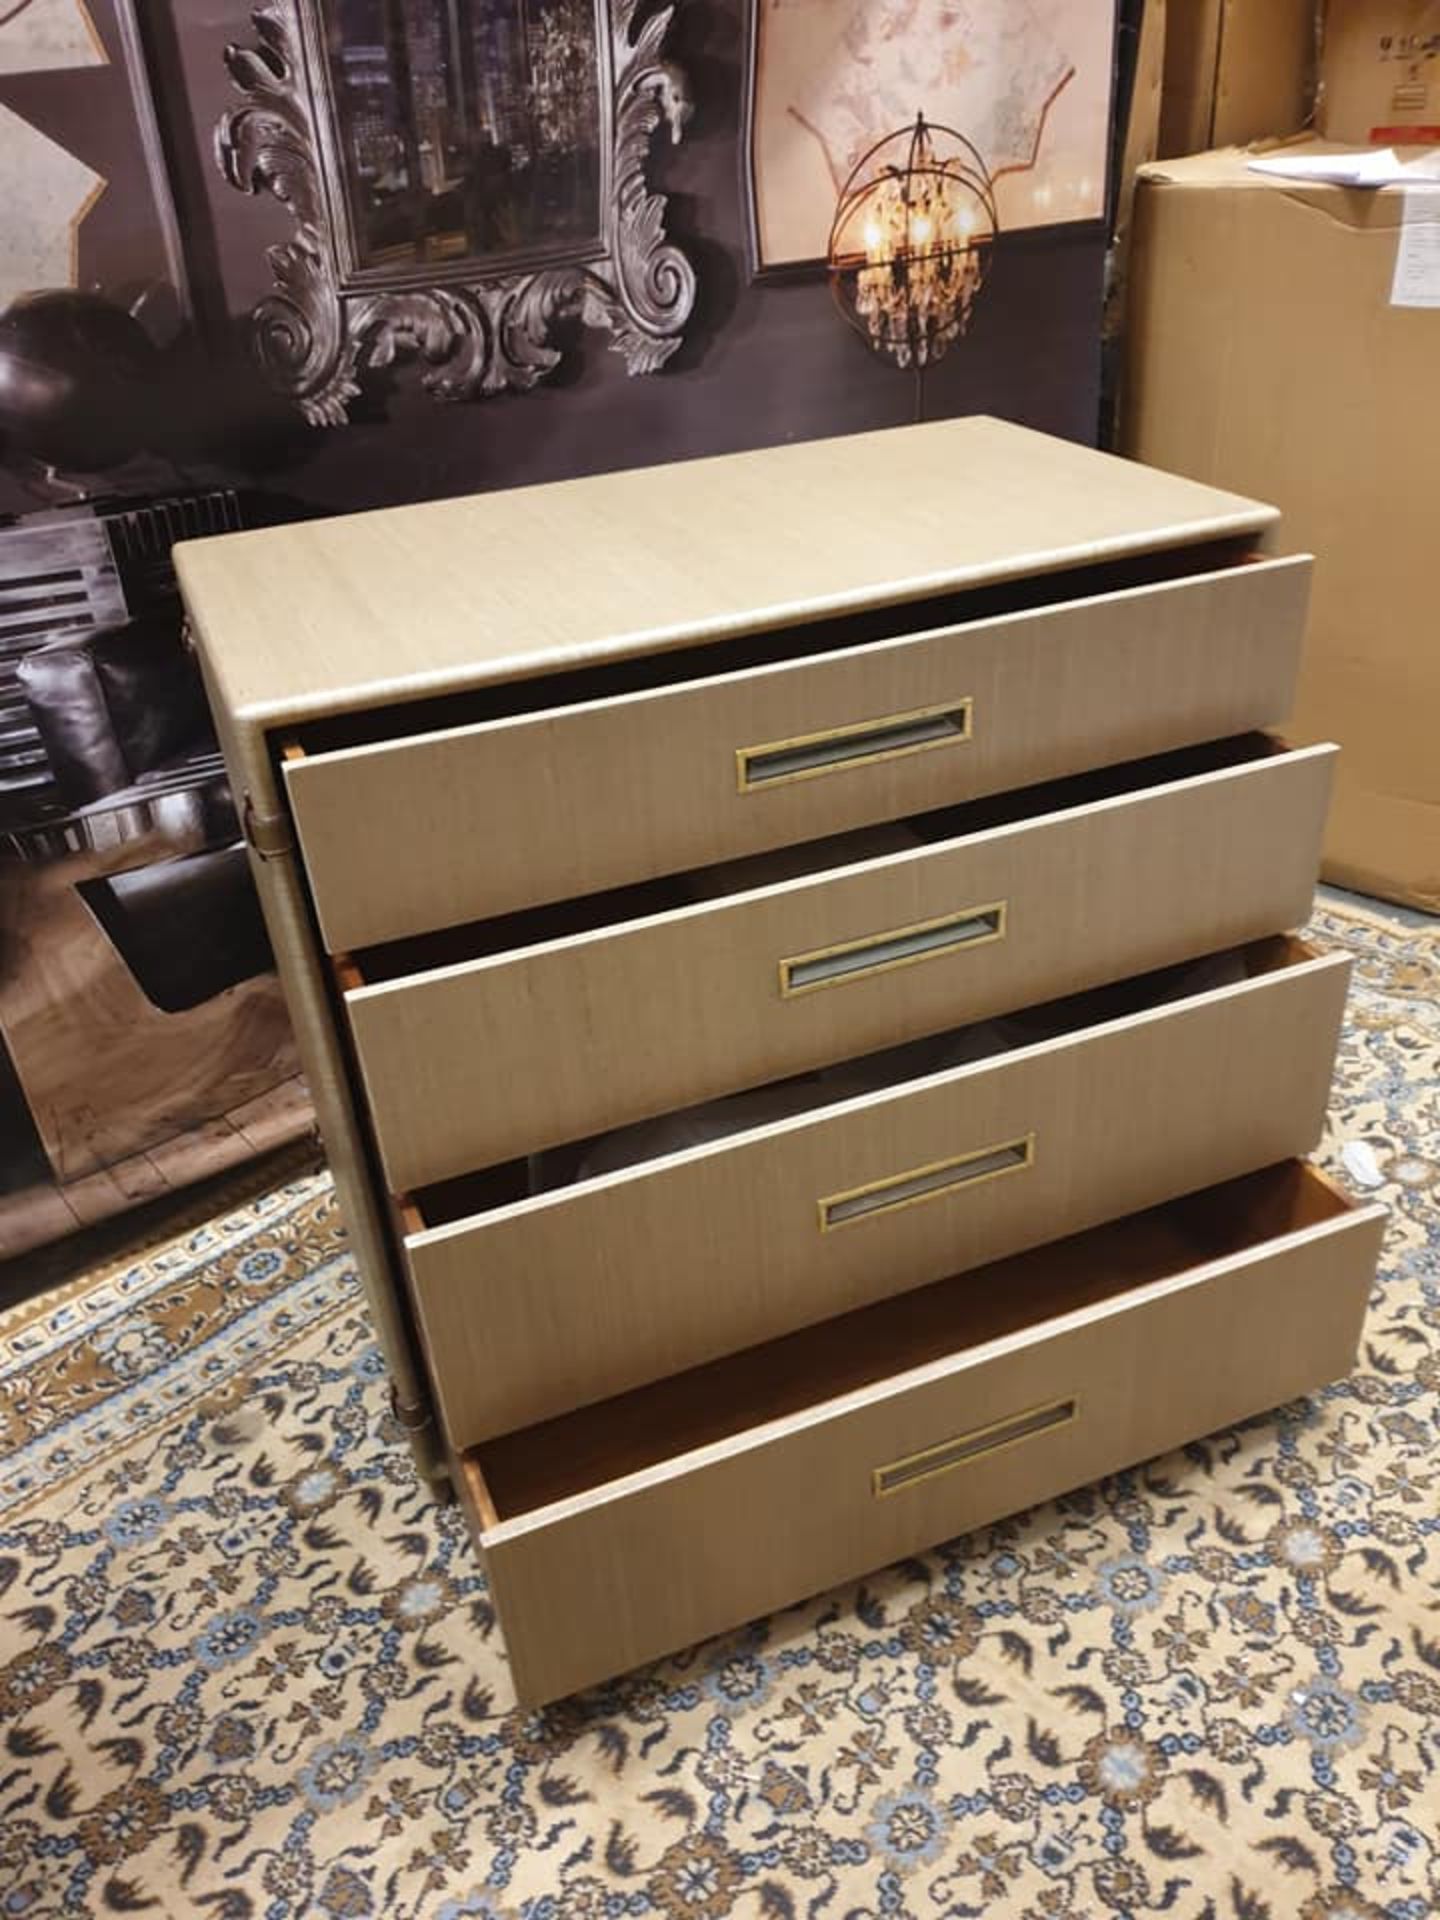 Starbay Sisal 4 Drawer Chest With Brass Inlay And Leather Strapping Work Of Celebrated British - Image 3 of 3